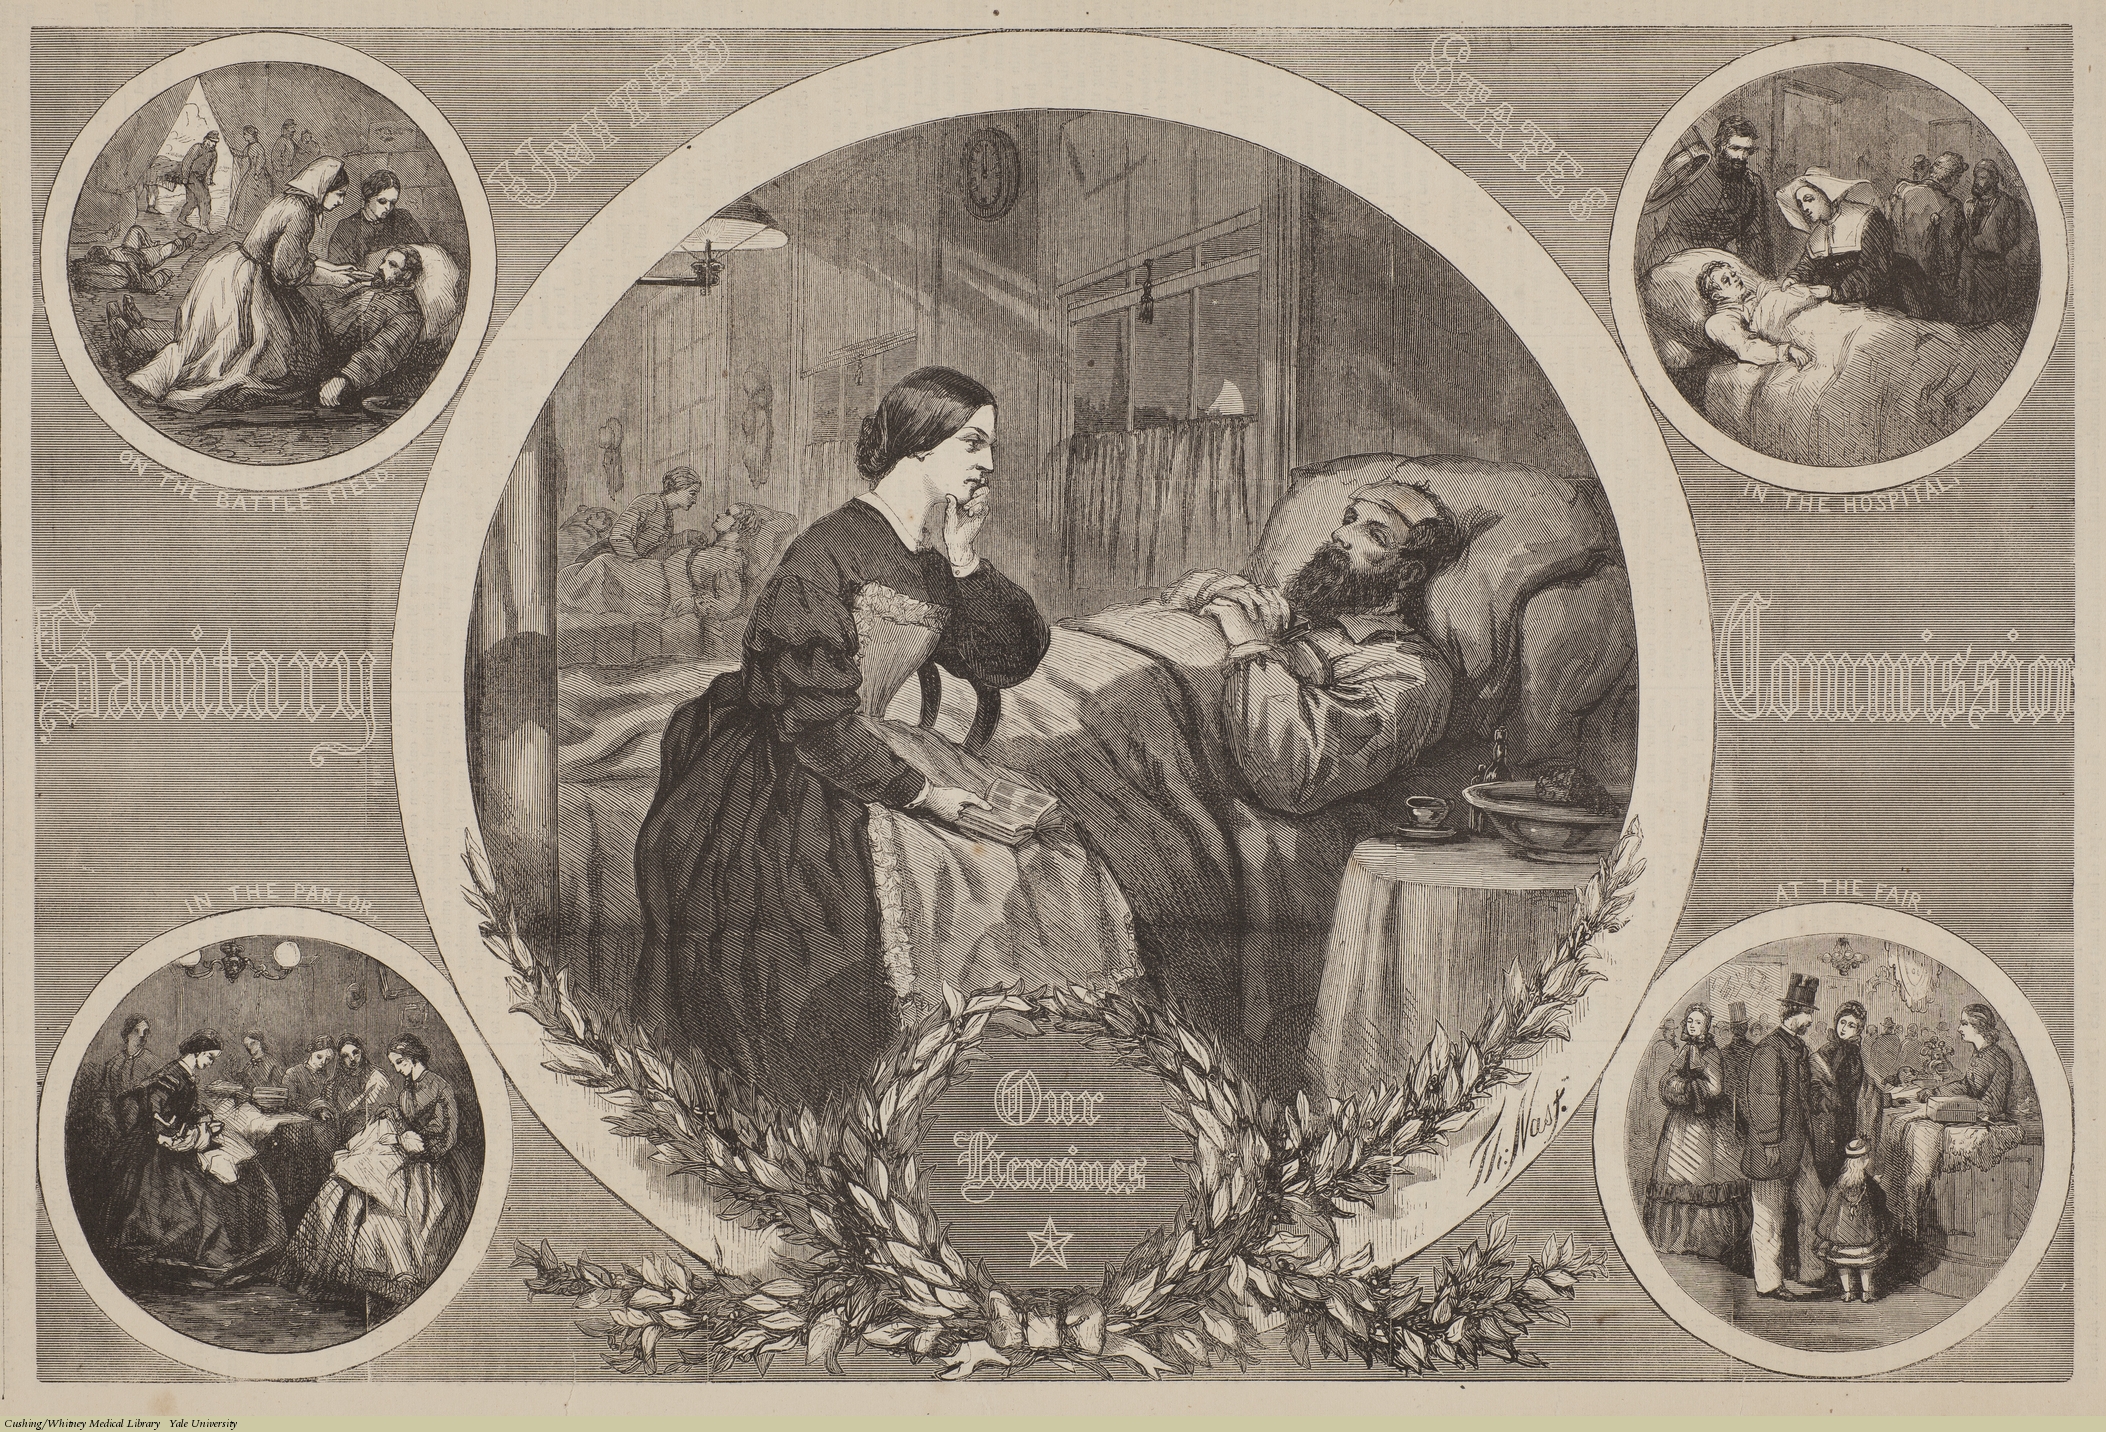 This print from Thomas Nast celebrates the work of the United States Sanitary Commission which here are called "Our Heroes." Five vignettes show the work of the Sanitary Commission in tending to the sick, sewing materials, and distributing goods. 